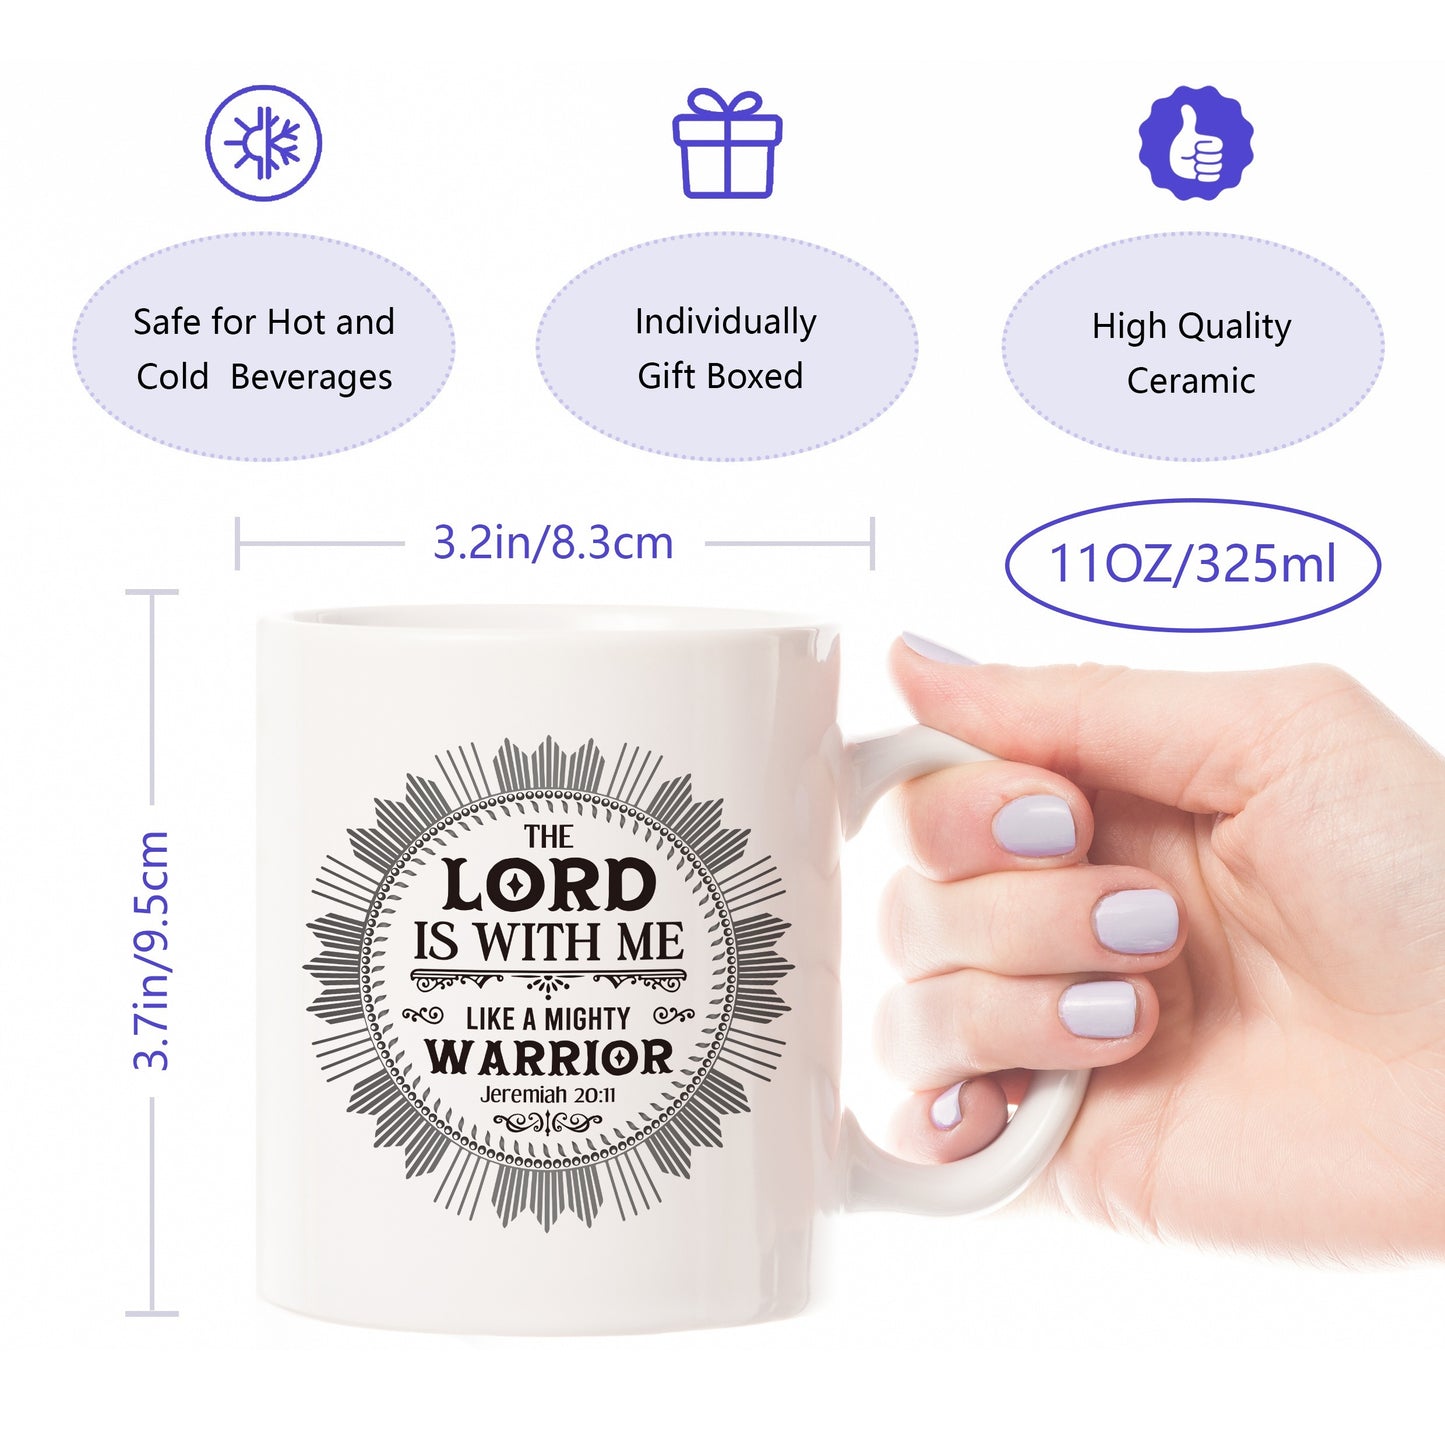 JEREMIAH 20:11 The Lord Is With Me Like A Mighty Warrior Christian White Ceramic Mug 11oz claimedbygoddesigns